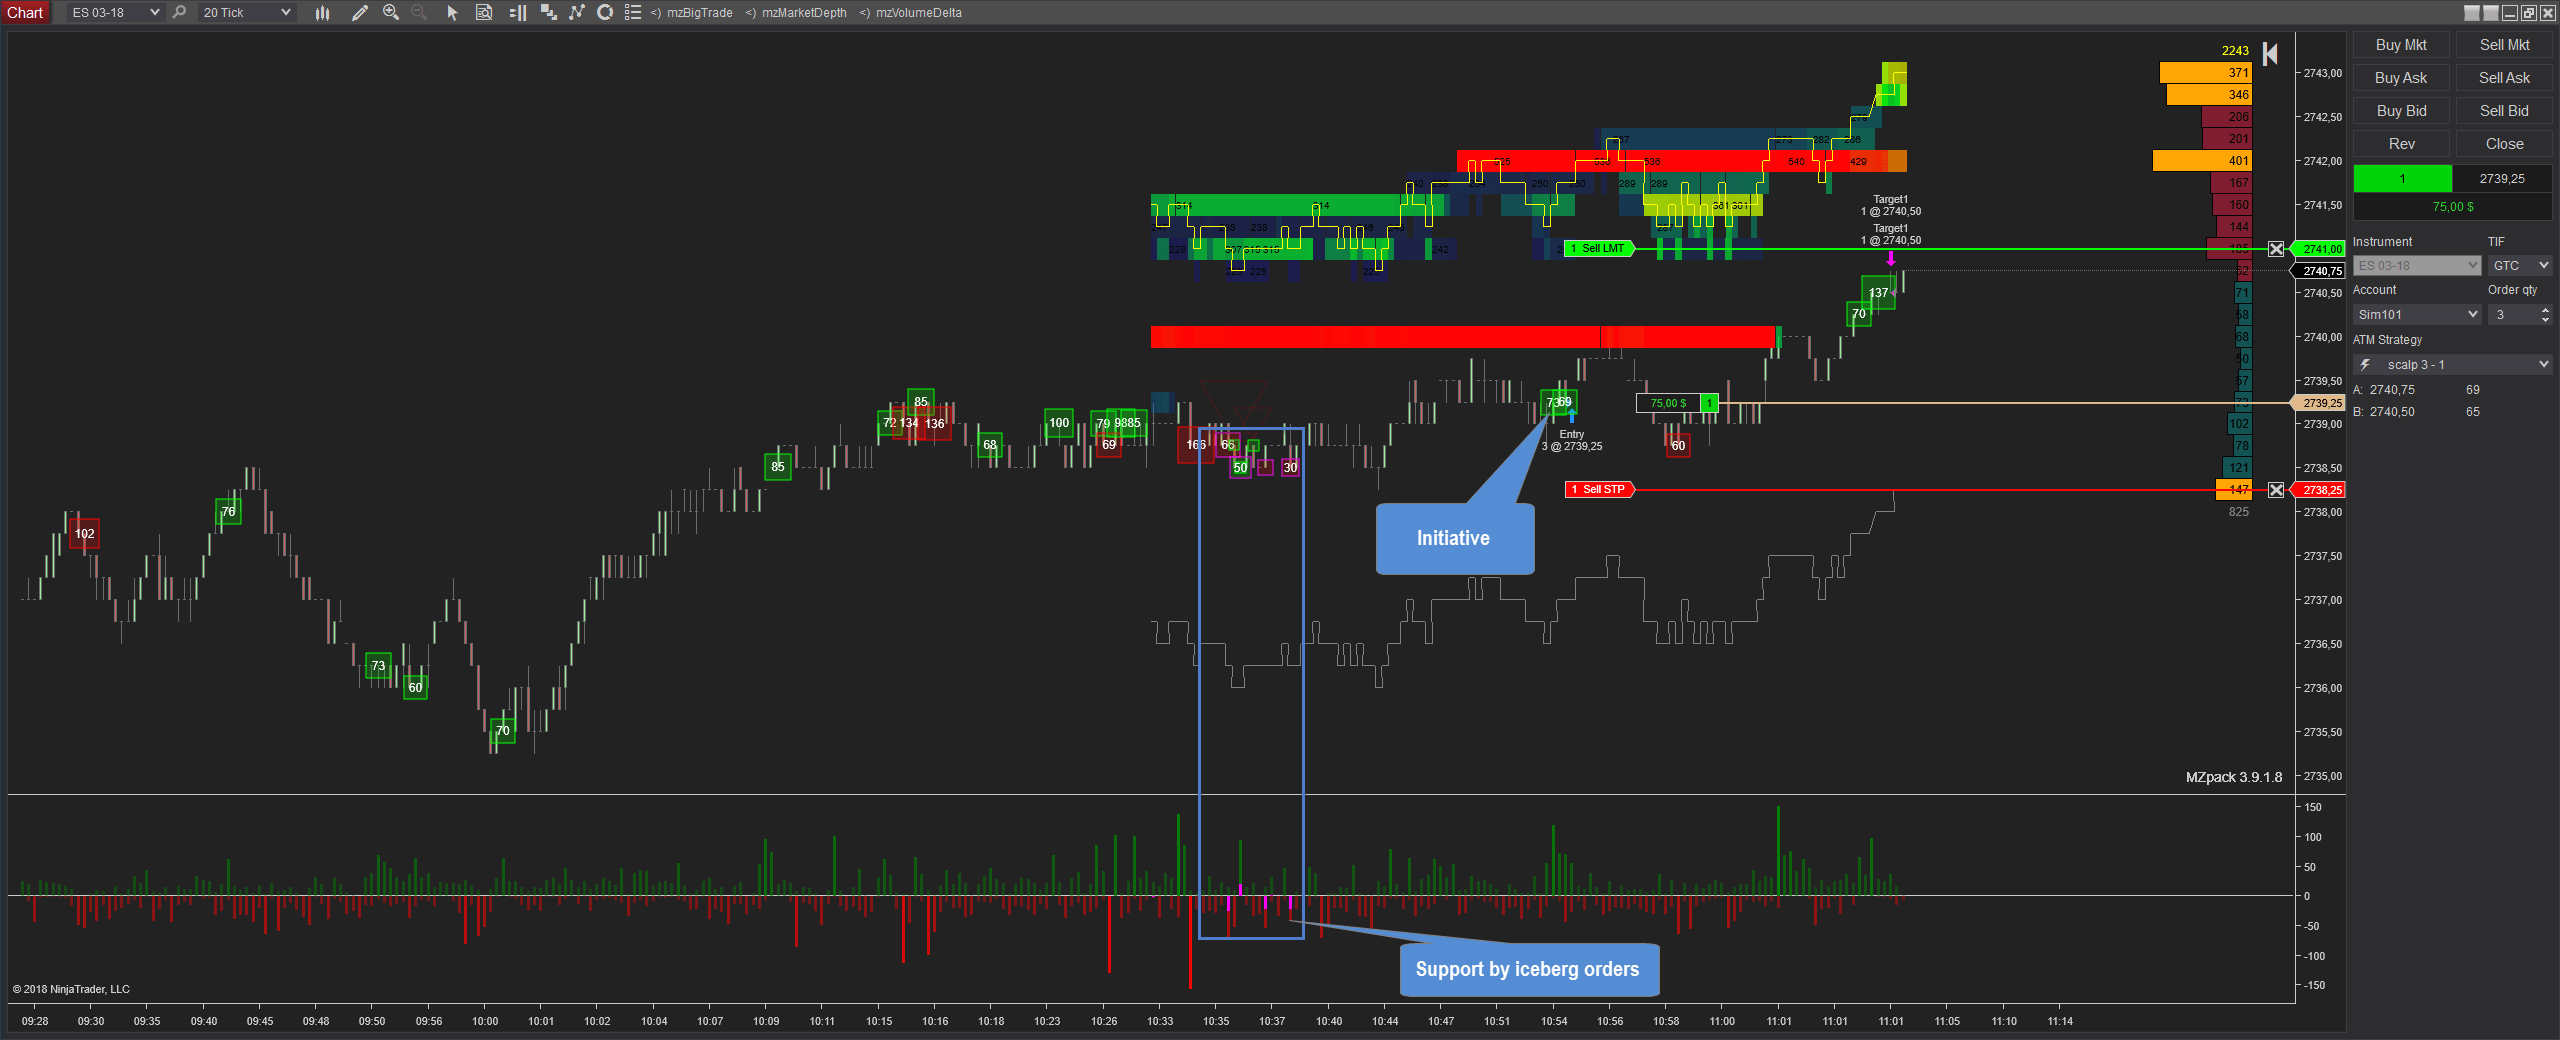 Simple E-min SP500 futures scalping strategy